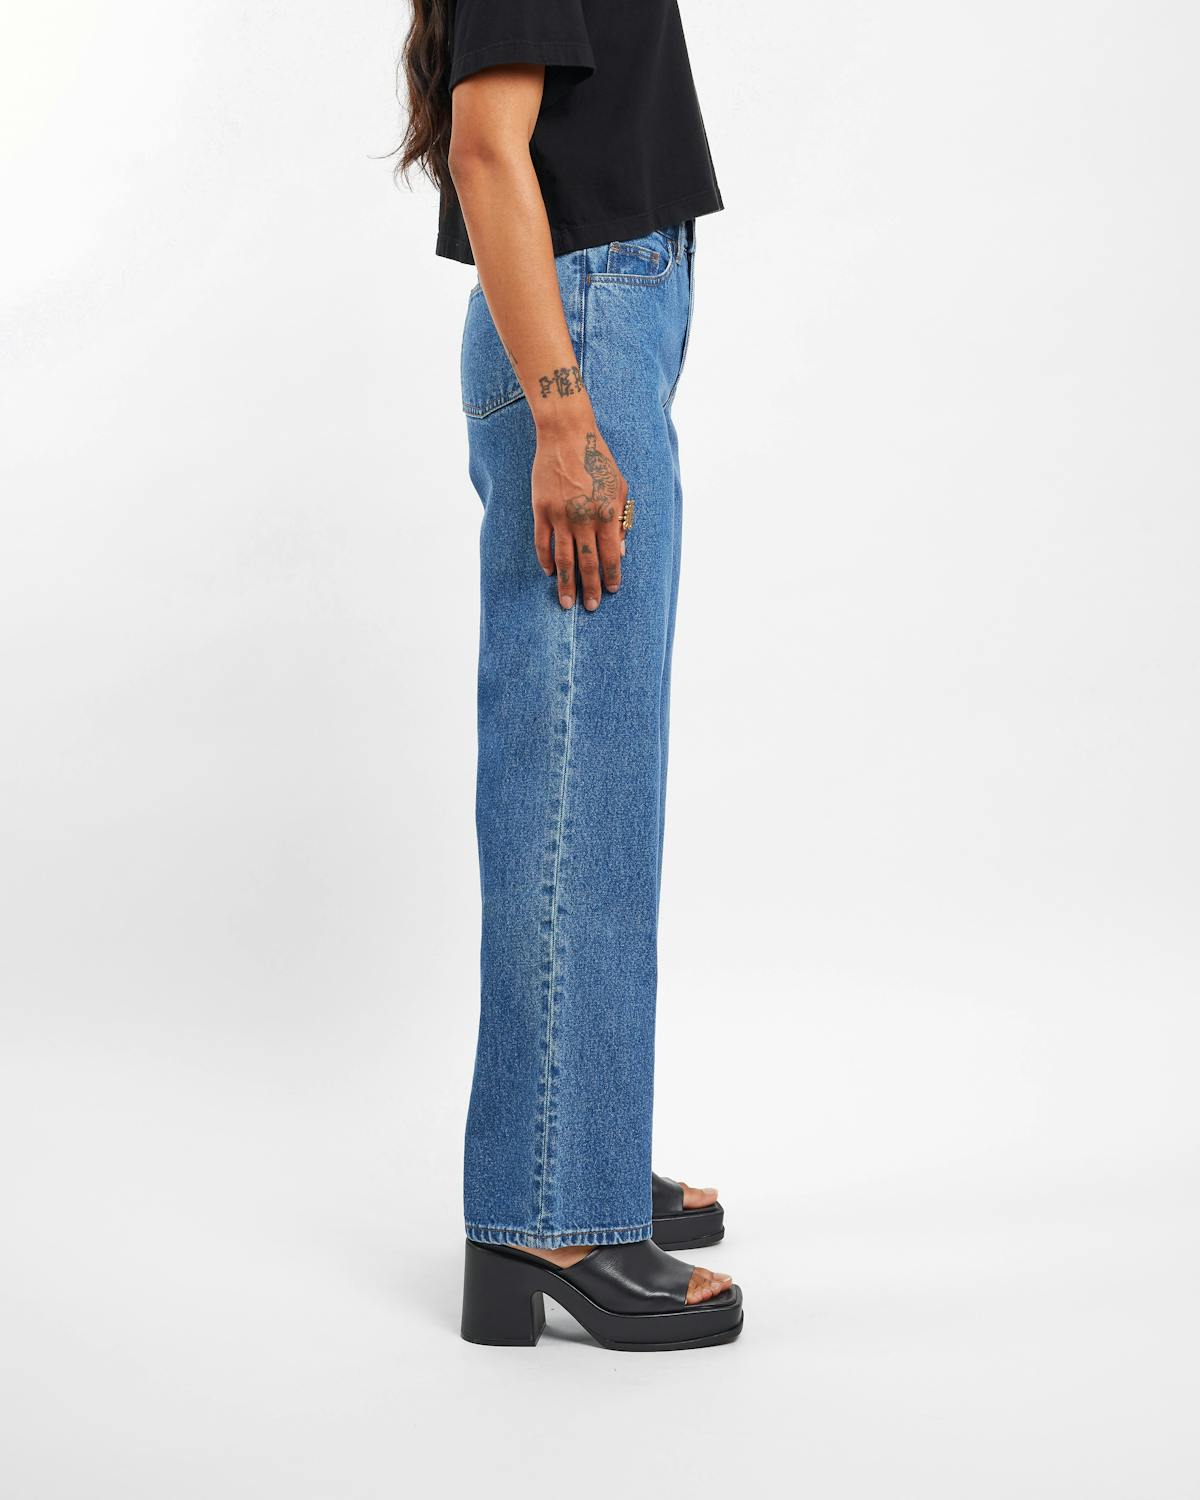 wide leg jeans in mid vintage - unspun made to order denim jeans